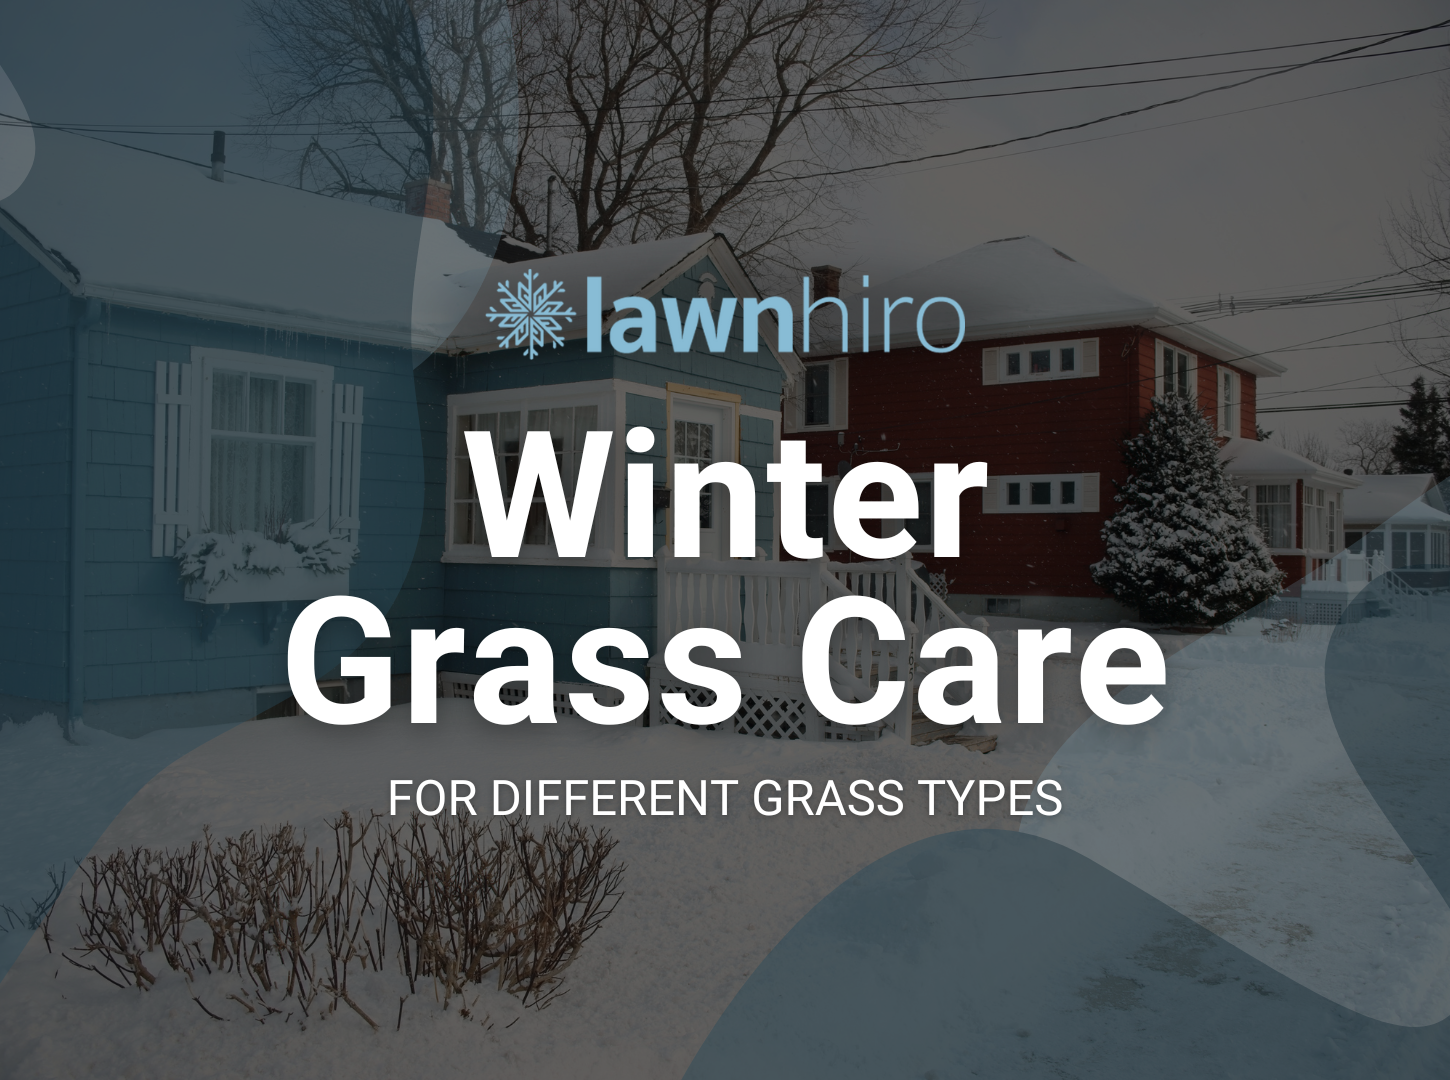 Featured image for “Winter Grass Care for Different Grass Types”